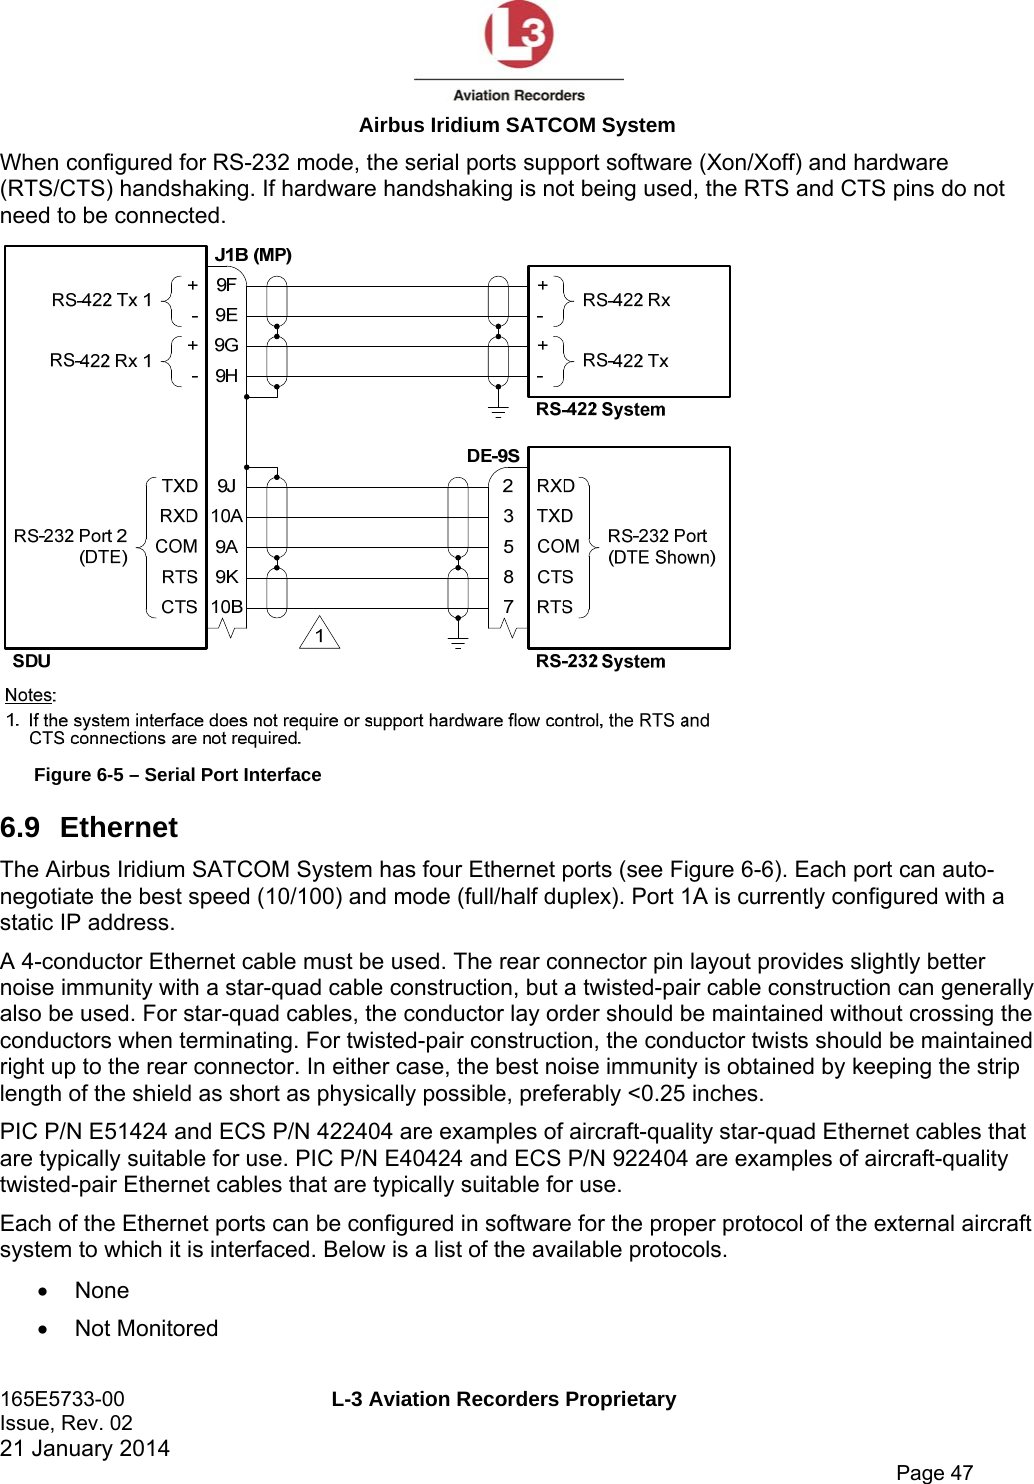  Airbus Iridium SATCOM System 165E5733-00  L-3 Aviation Recorders Proprietary Issue, Rev. 02   21 January 2014      Page 47 When configured for RS-232 mode, the serial ports support software (Xon/Xoff) and hardware (RTS/CTS) handshaking. If hardware handshaking is not being used, the RTS and CTS pins do not need to be connected.  Figure 6-5 – Serial Port Interface 6.9 Ethernet The Airbus Iridium SATCOM System has four Ethernet ports (see Figure 6-6). Each port can auto-negotiate the best speed (10/100) and mode (full/half duplex). Port 1A is currently configured with a static IP address. A 4-conductor Ethernet cable must be used. The rear connector pin layout provides slightly better noise immunity with a star-quad cable construction, but a twisted-pair cable construction can generally also be used. For star-quad cables, the conductor lay order should be maintained without crossing the conductors when terminating. For twisted-pair construction, the conductor twists should be maintained right up to the rear connector. In either case, the best noise immunity is obtained by keeping the strip length of the shield as short as physically possible, preferably &lt;0.25 inches. PIC P/N E51424 and ECS P/N 422404 are examples of aircraft-quality star-quad Ethernet cables that are typically suitable for use. PIC P/N E40424 and ECS P/N 922404 are examples of aircraft-quality twisted-pair Ethernet cables that are typically suitable for use. Each of the Ethernet ports can be configured in software for the proper protocol of the external aircraft system to which it is interfaced. Below is a list of the available protocols.  None  Not Monitored 